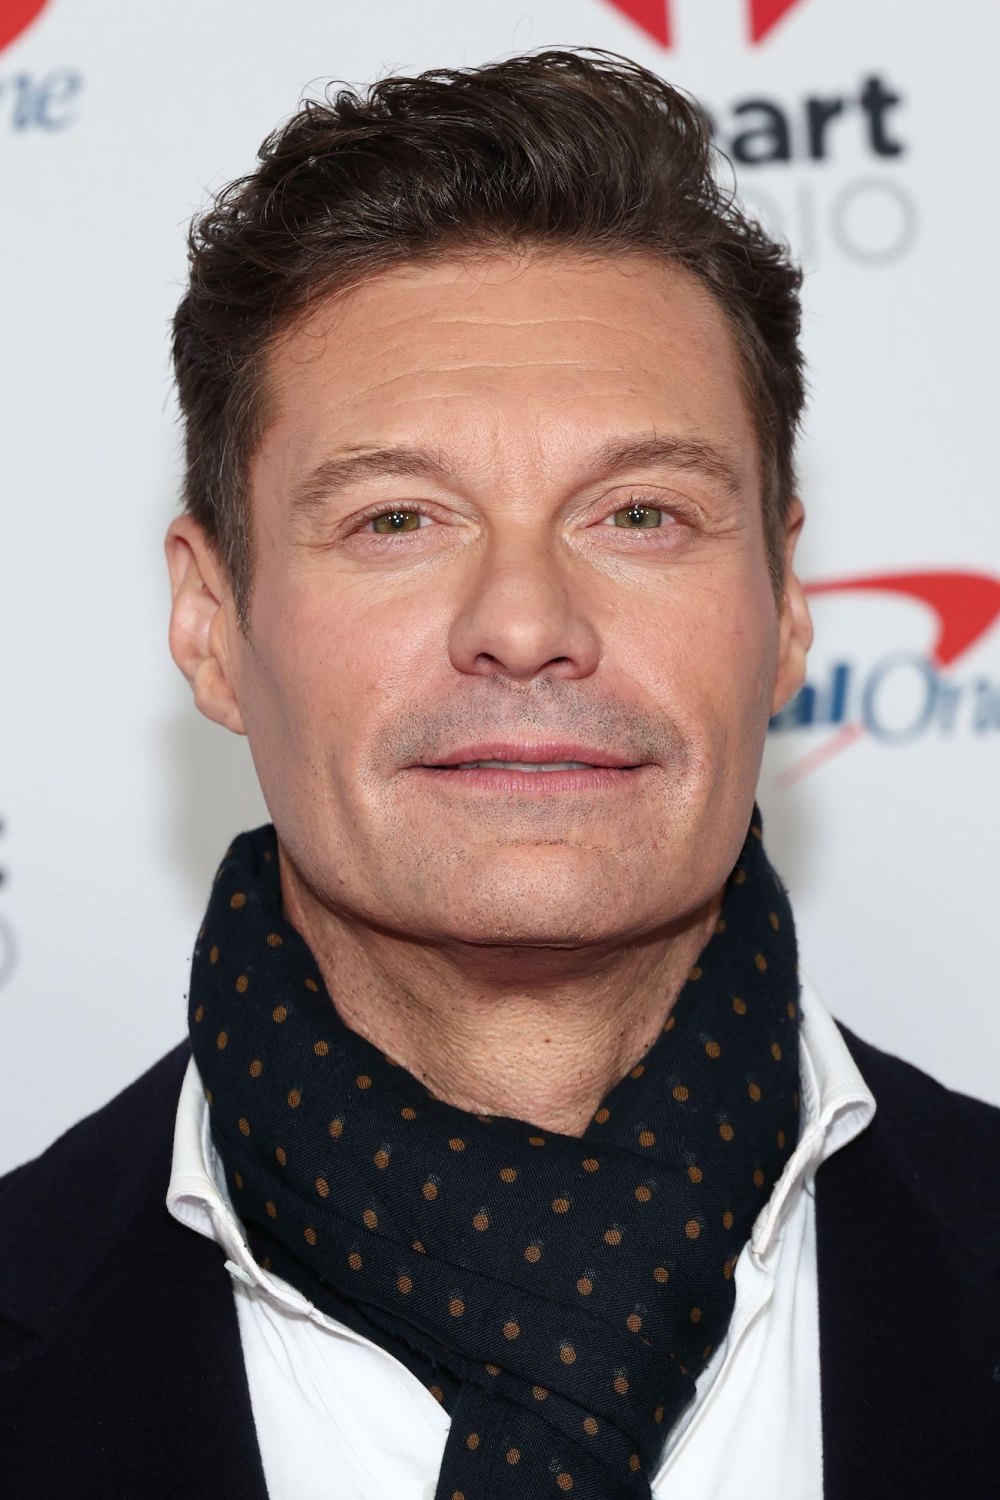 Ryan Seacrest Recalls NYE Mishap Where Taylor Swift Ended Up With His Equipment